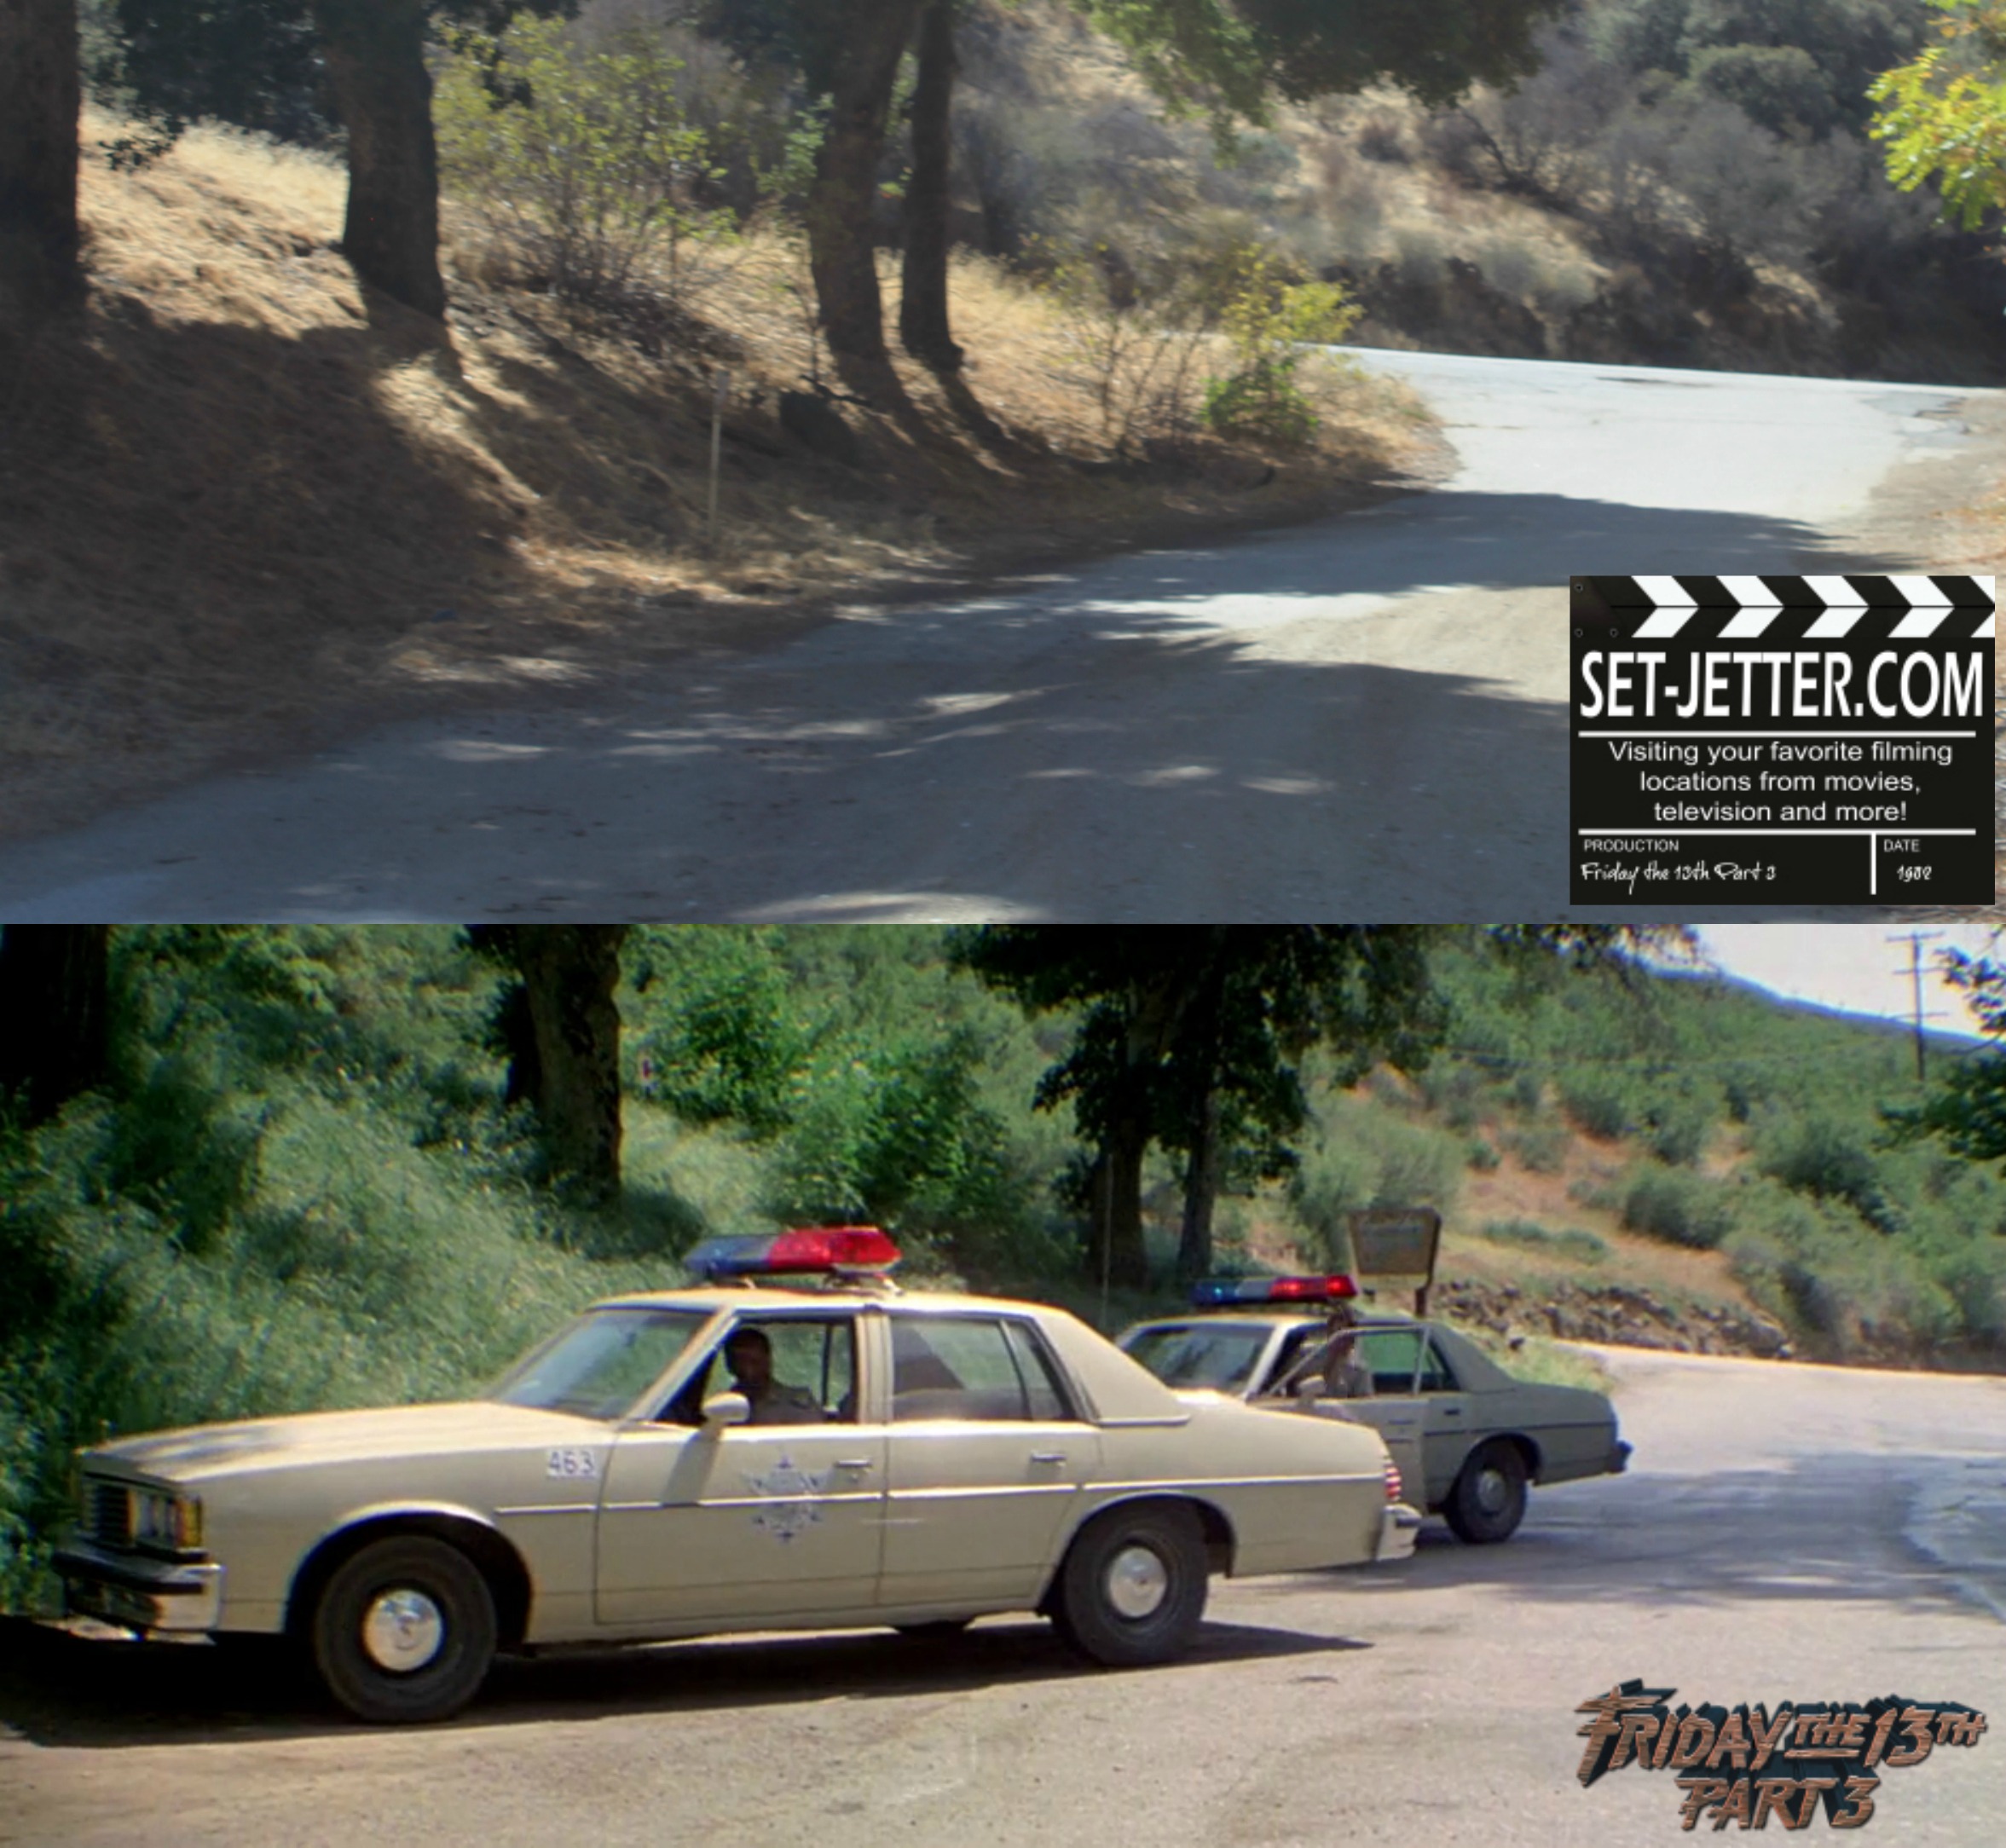 Friday the 13th Part 3 comparison 216.jpg